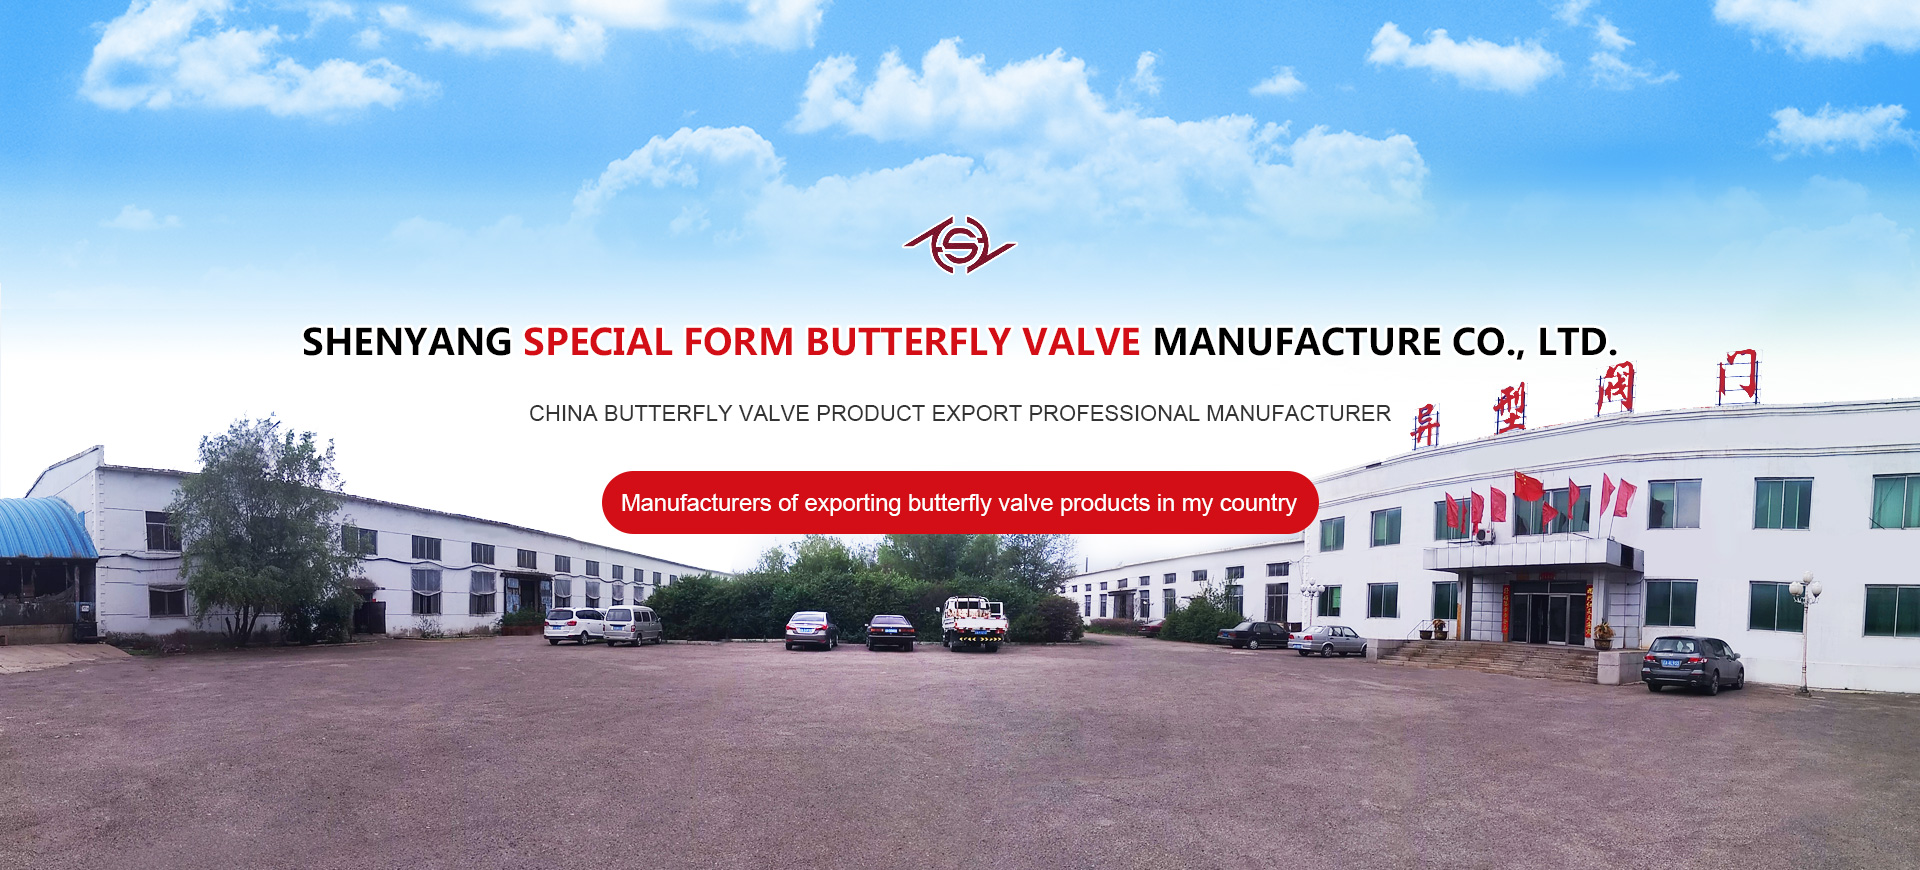 Shenyang Special Form Butterfly Valve Manufacture Co., Ltd.